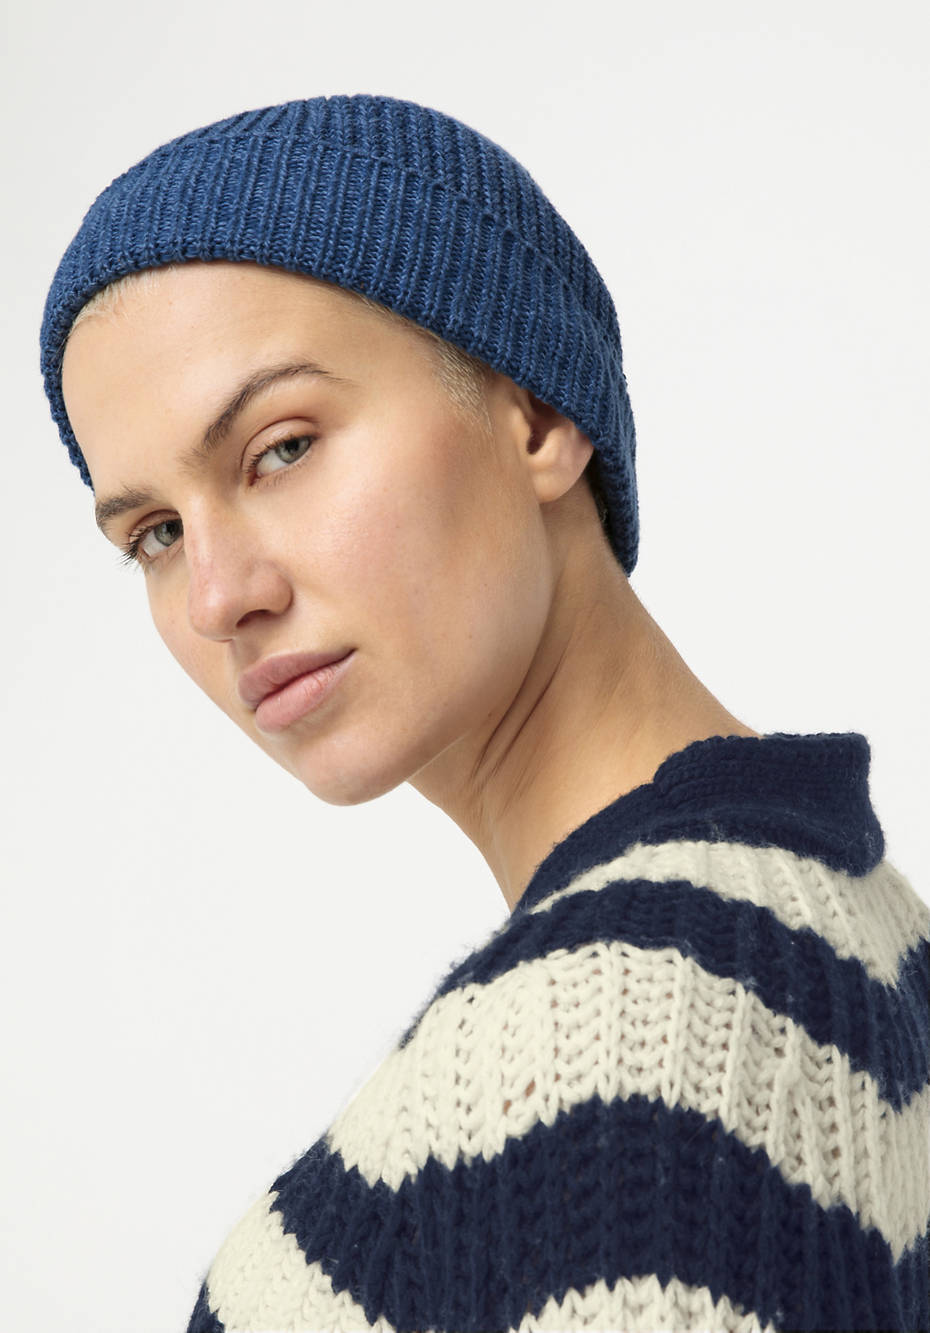 Knitted hat BetterRecycling made from pure organic cotton